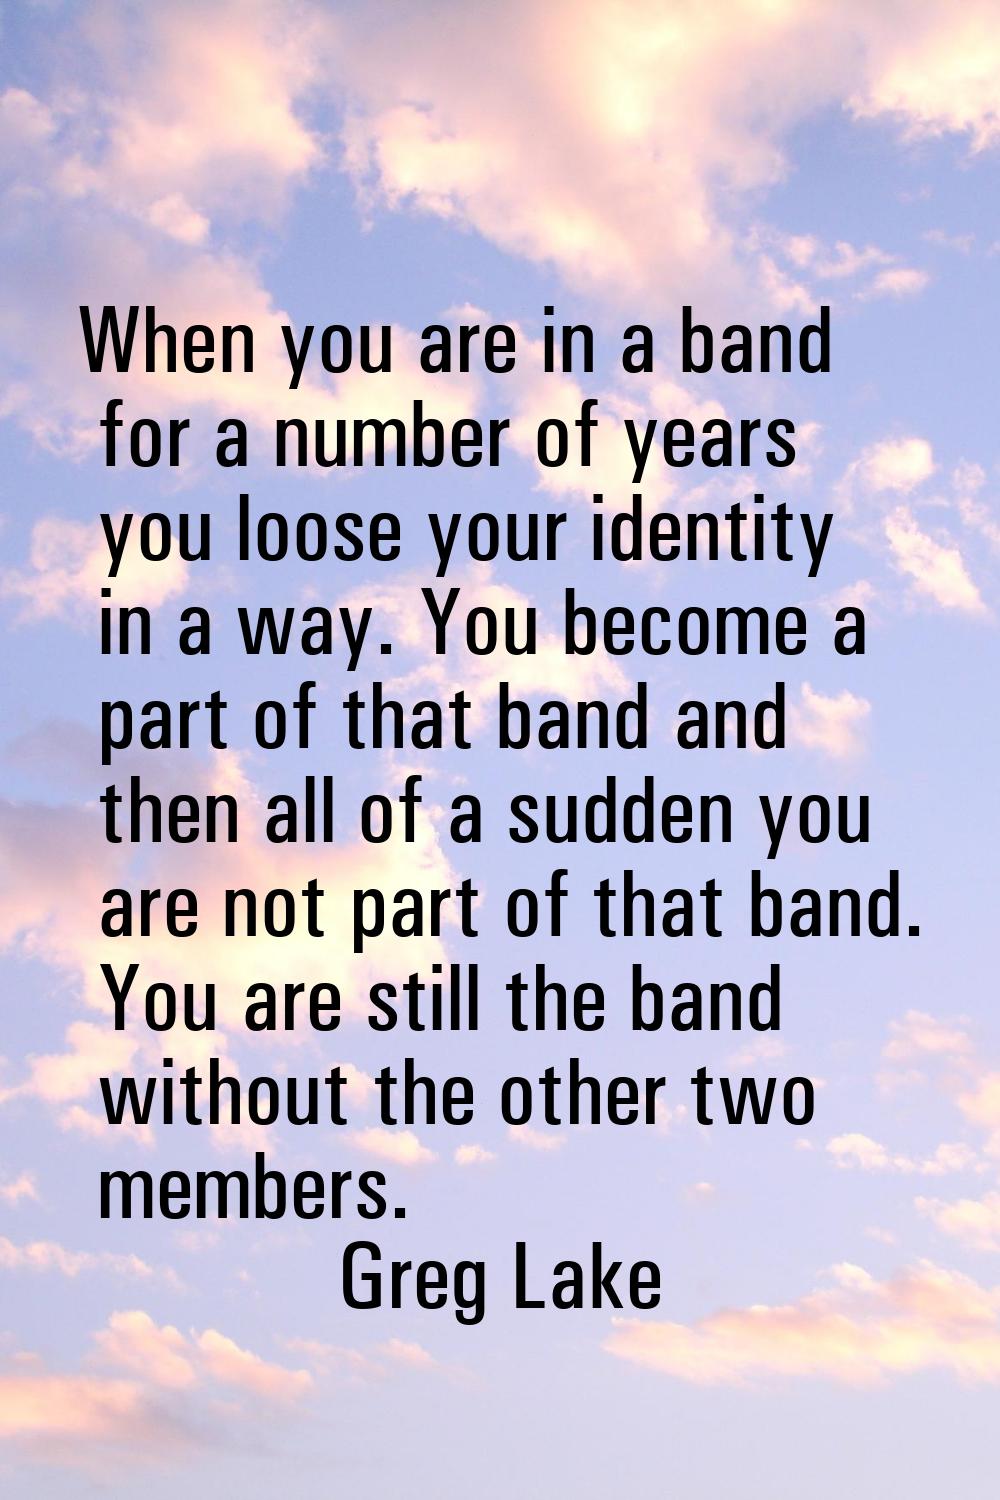 When you are in a band for a number of years you loose your identity in a way. You become a part of